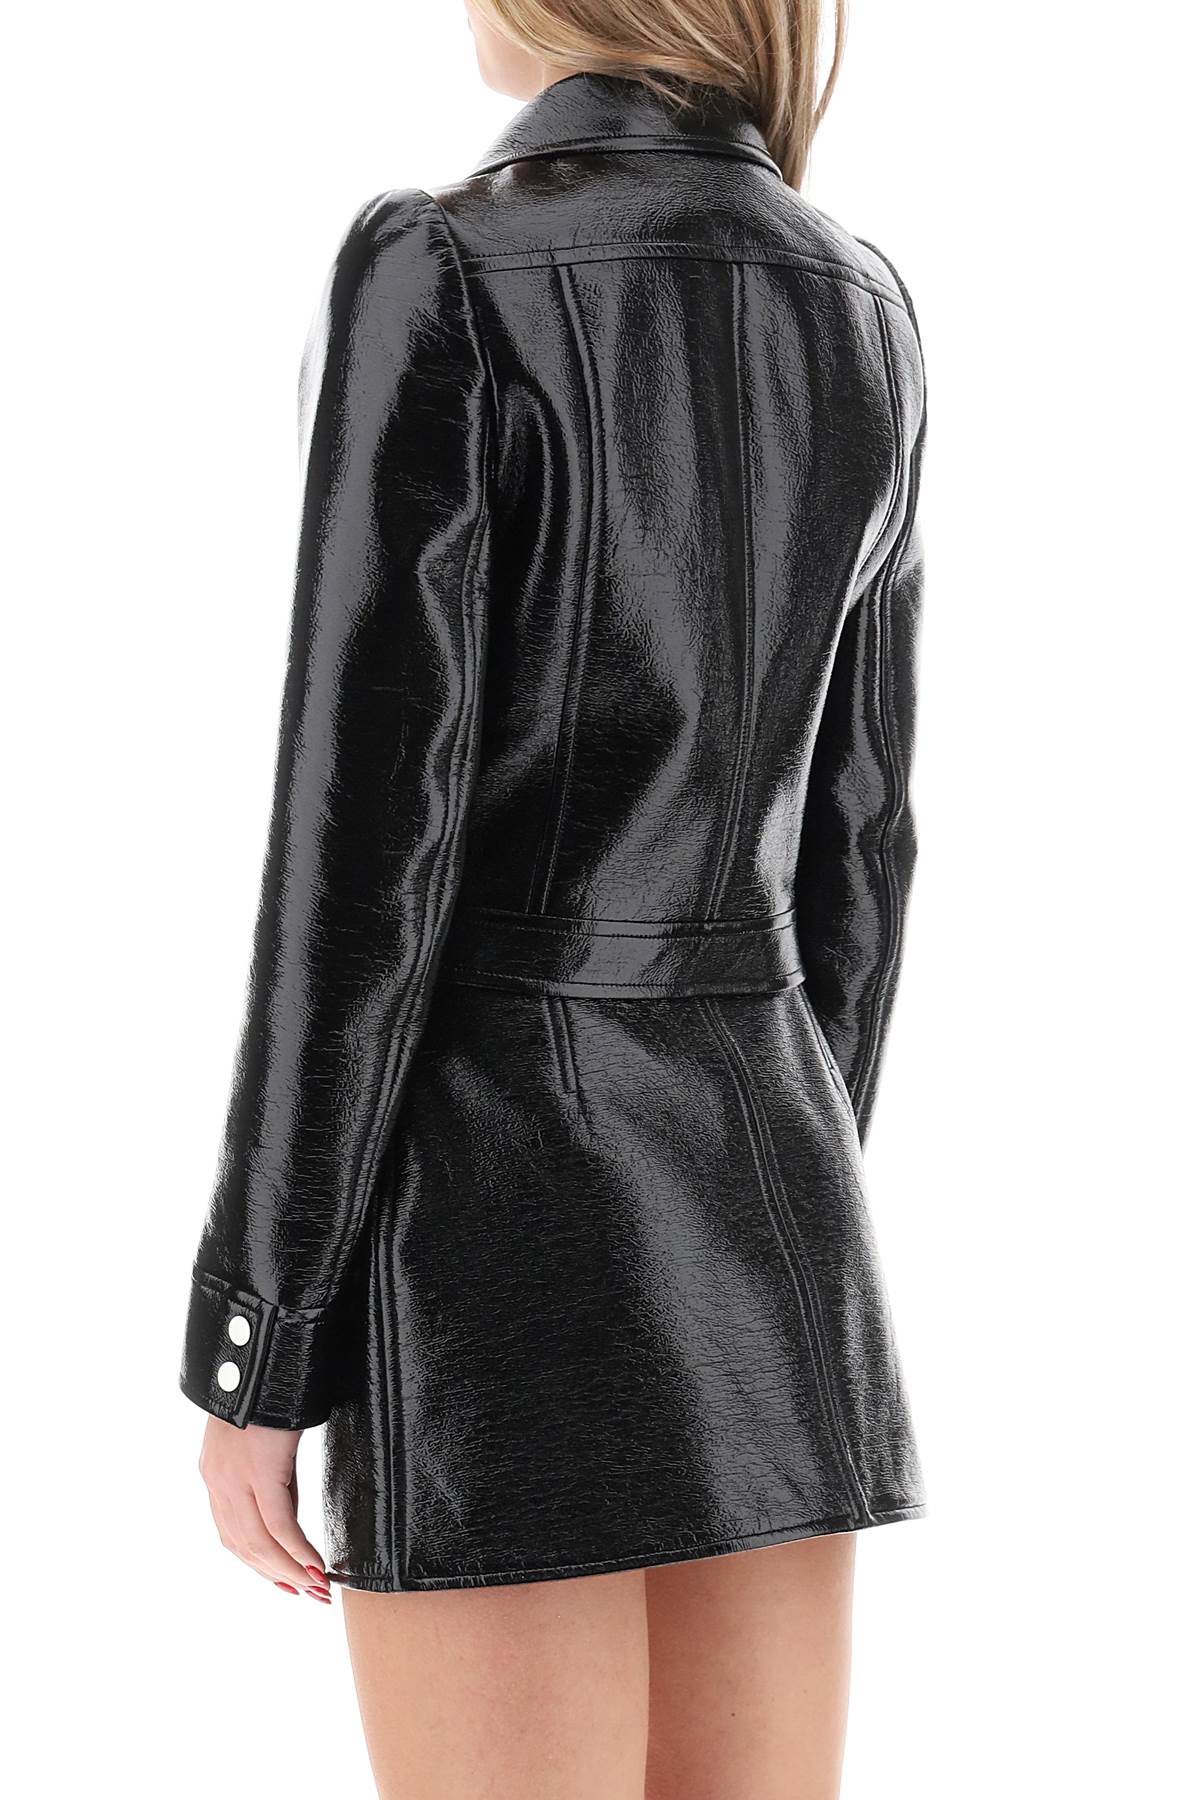 COURREGÈS Stylish Black Coated Cotton Jacket for Women - SS24 Collection